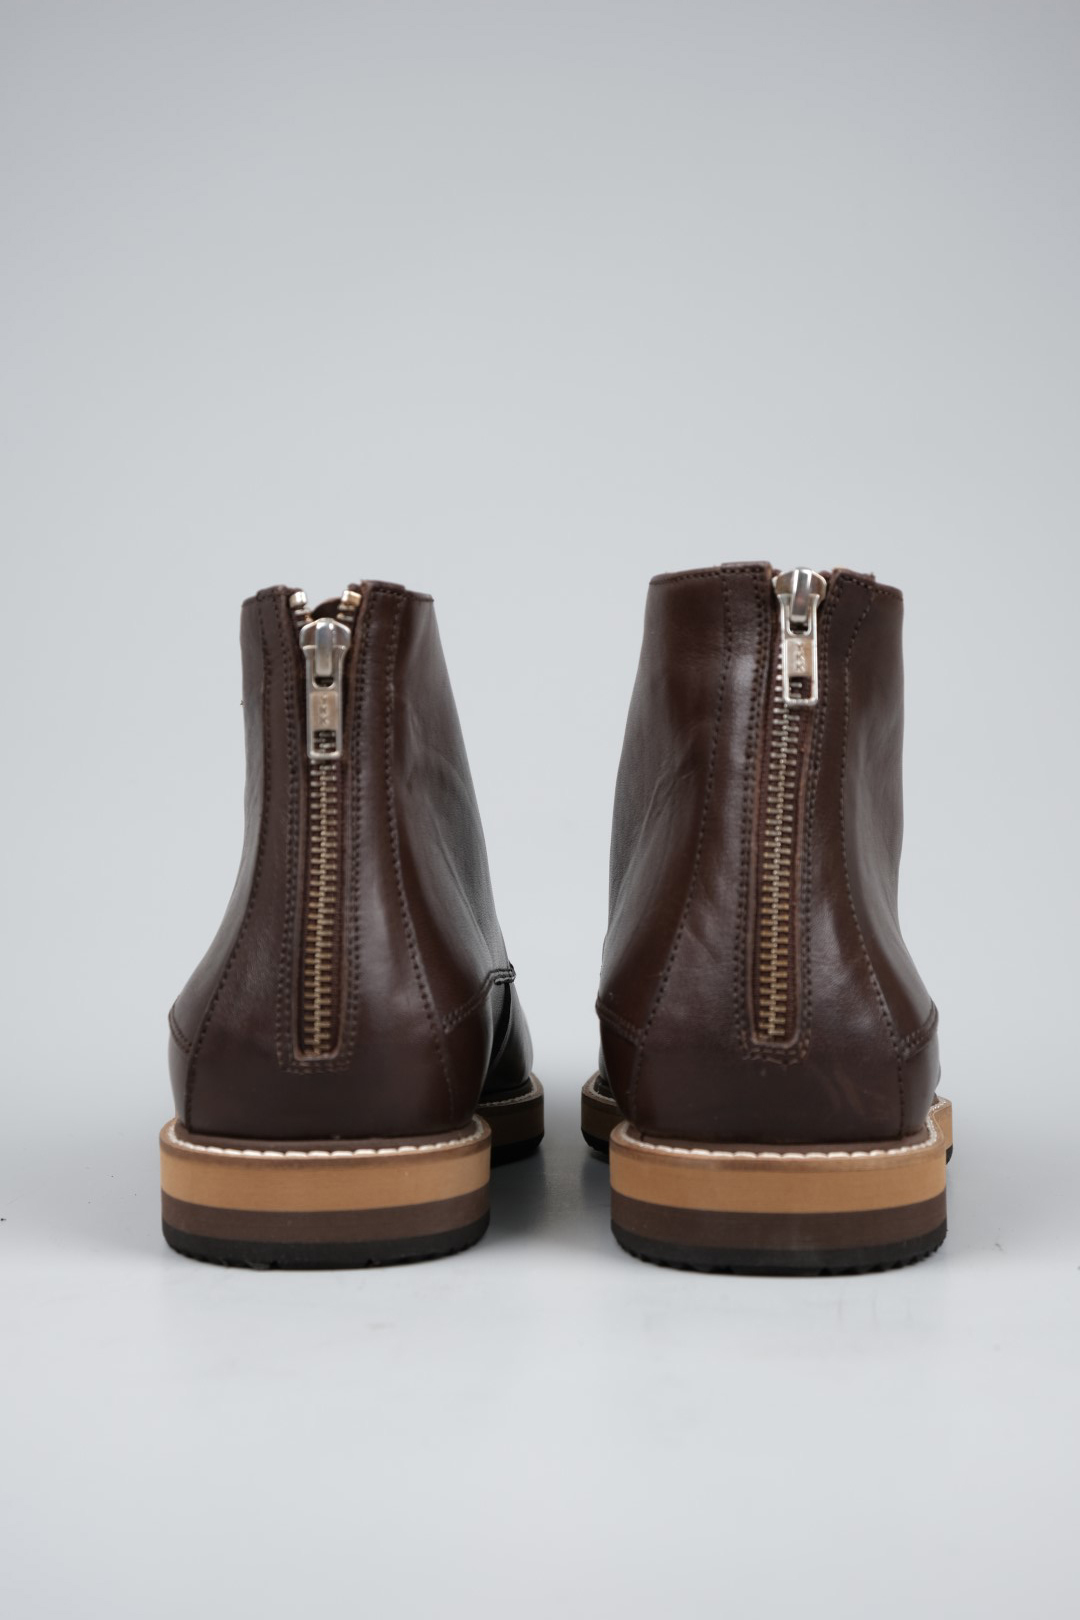 LEATHER BOOTS - BROWN - 4